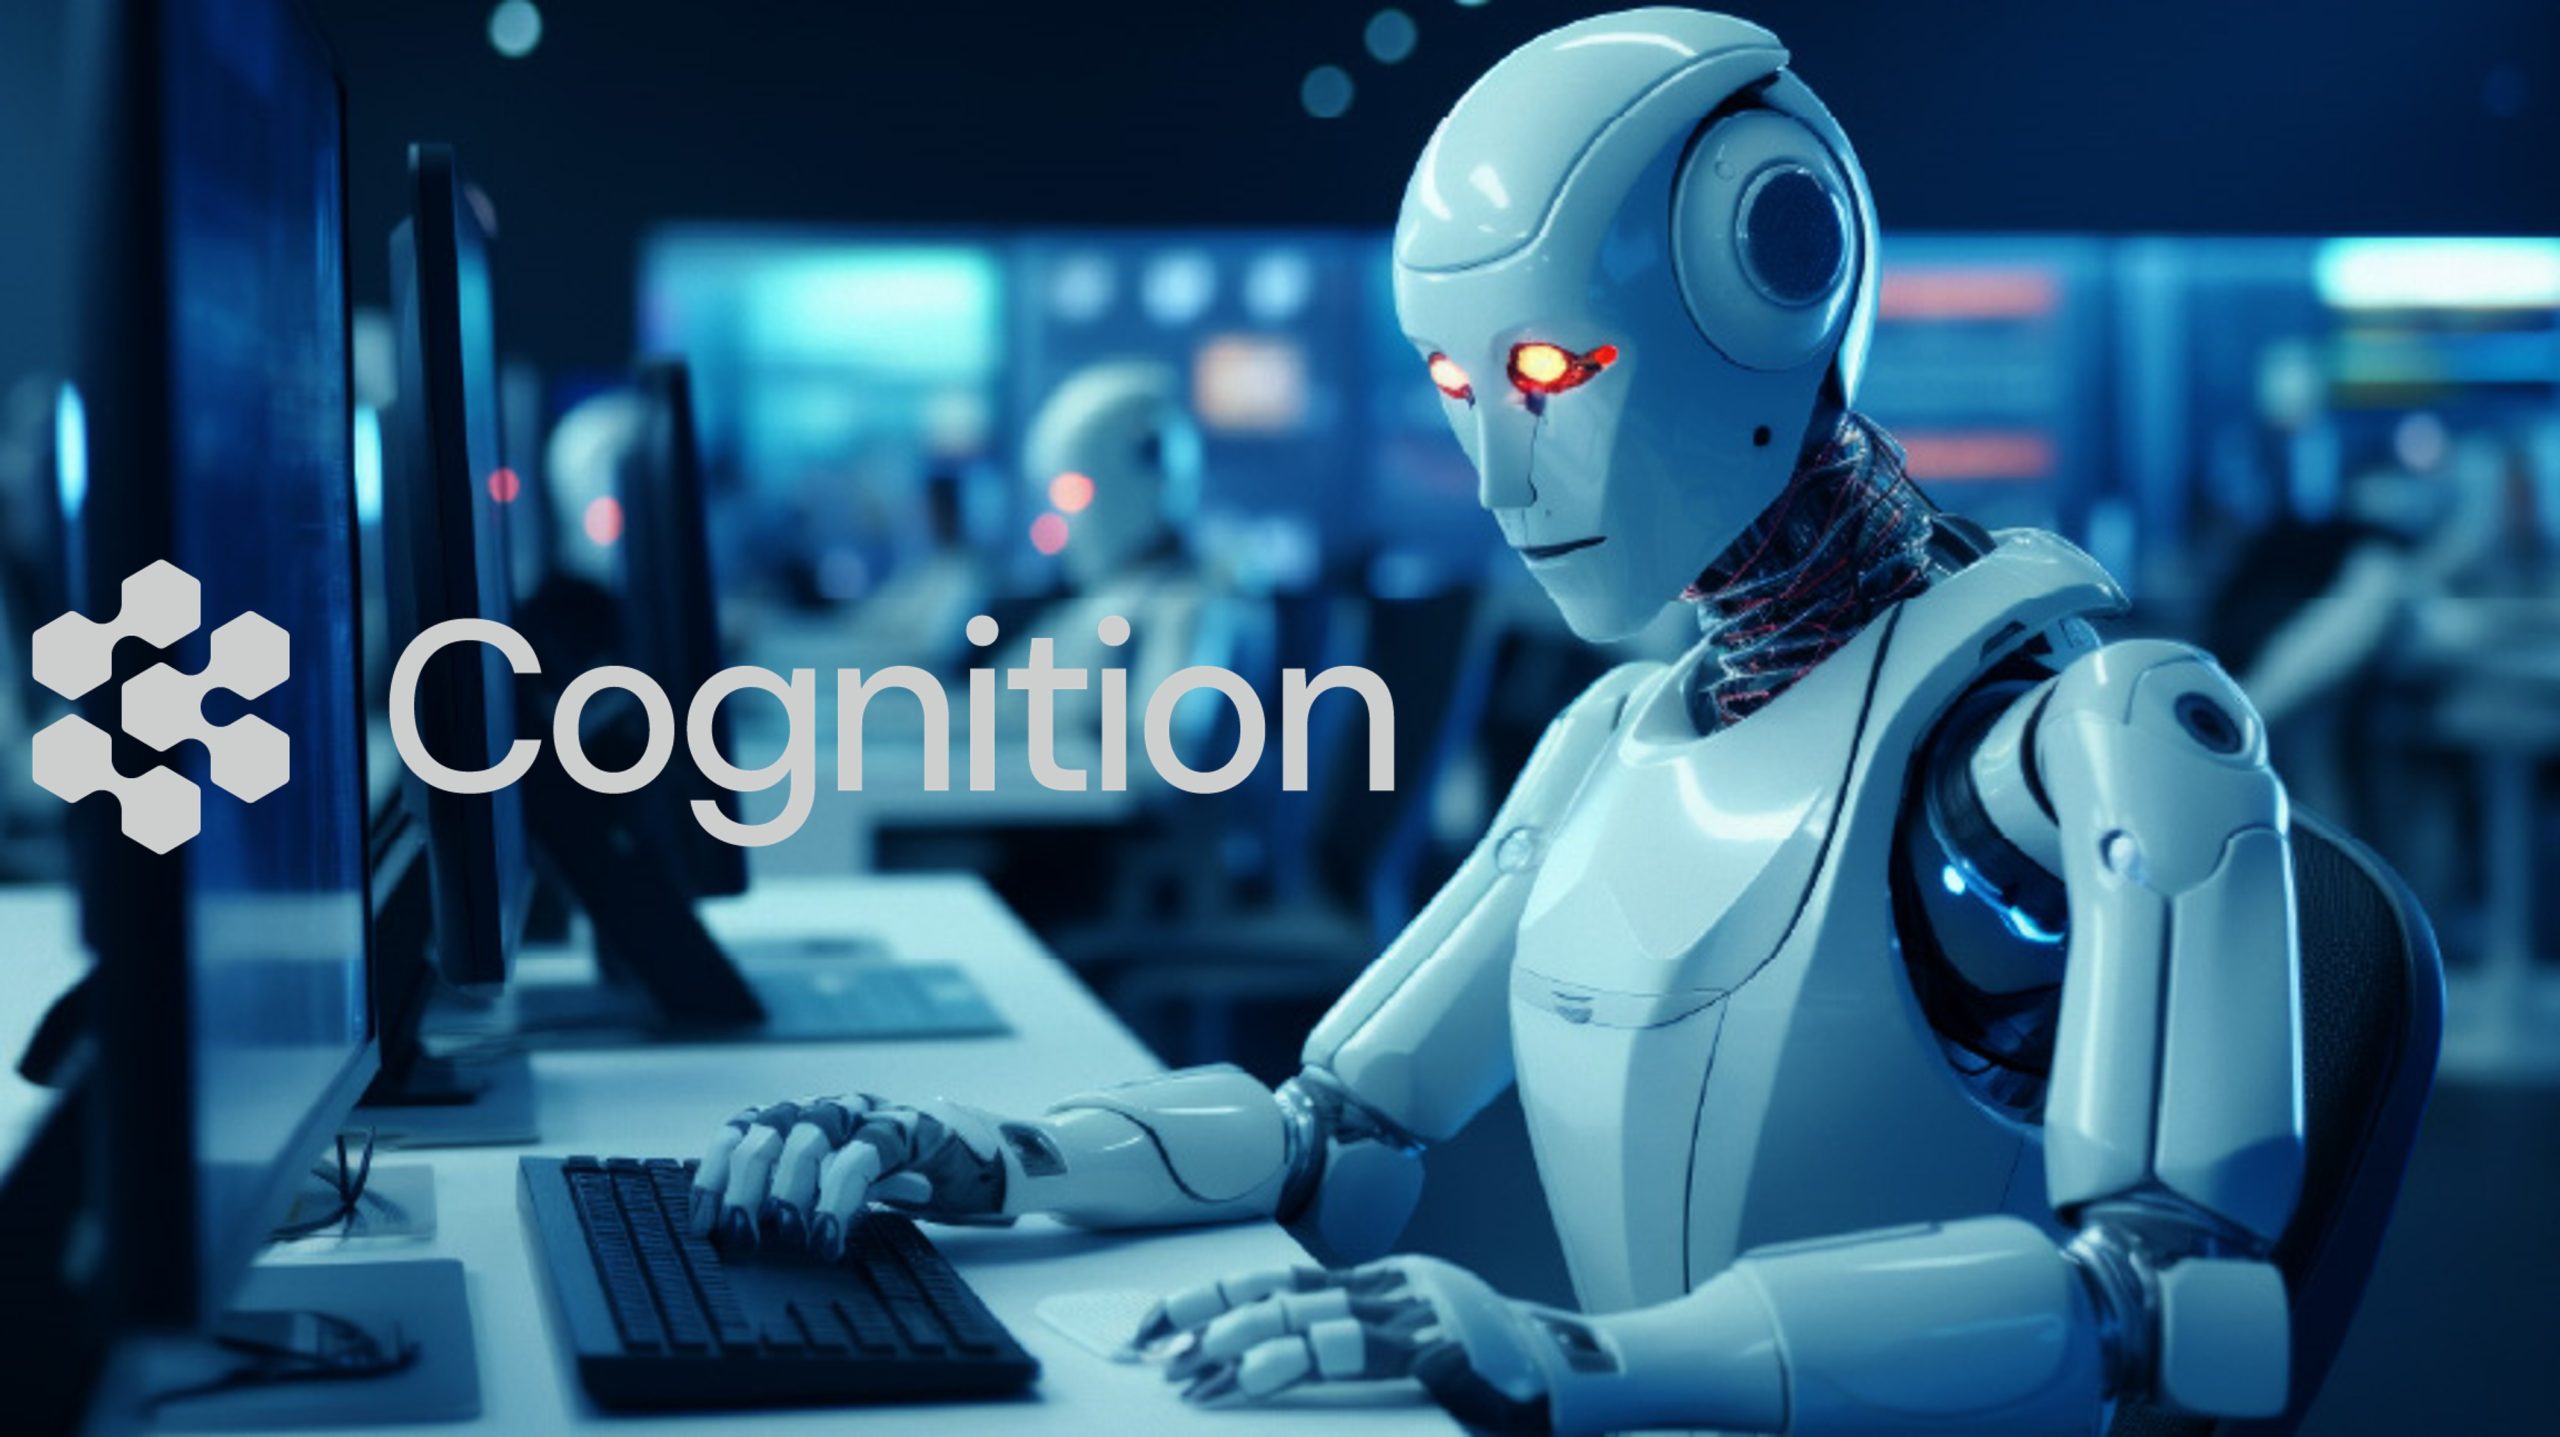 Cognition Launches The World's First AI Software Engineer, Devin